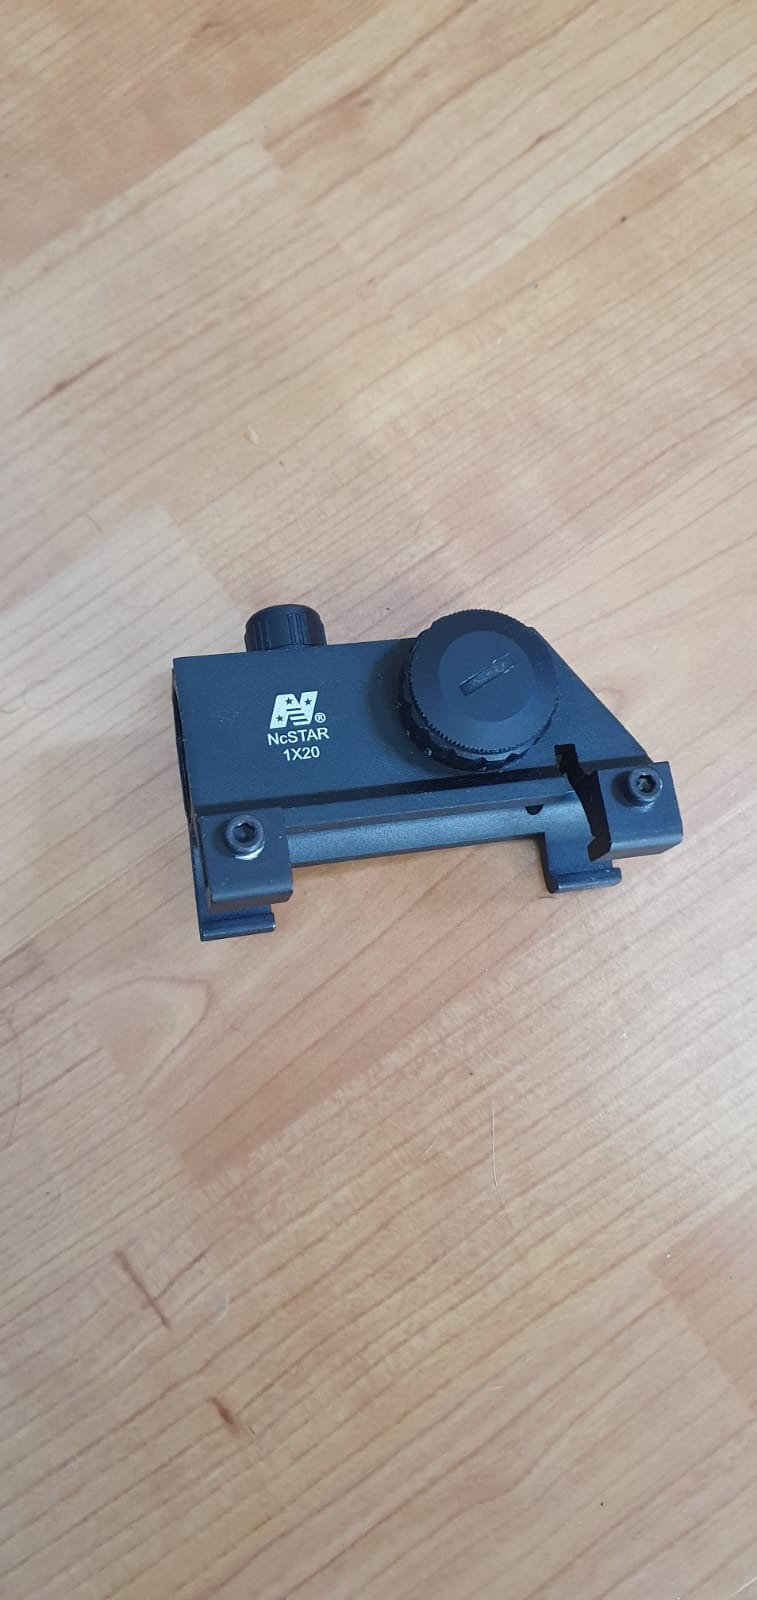 Image 1 for Mp5 claw mount reddot